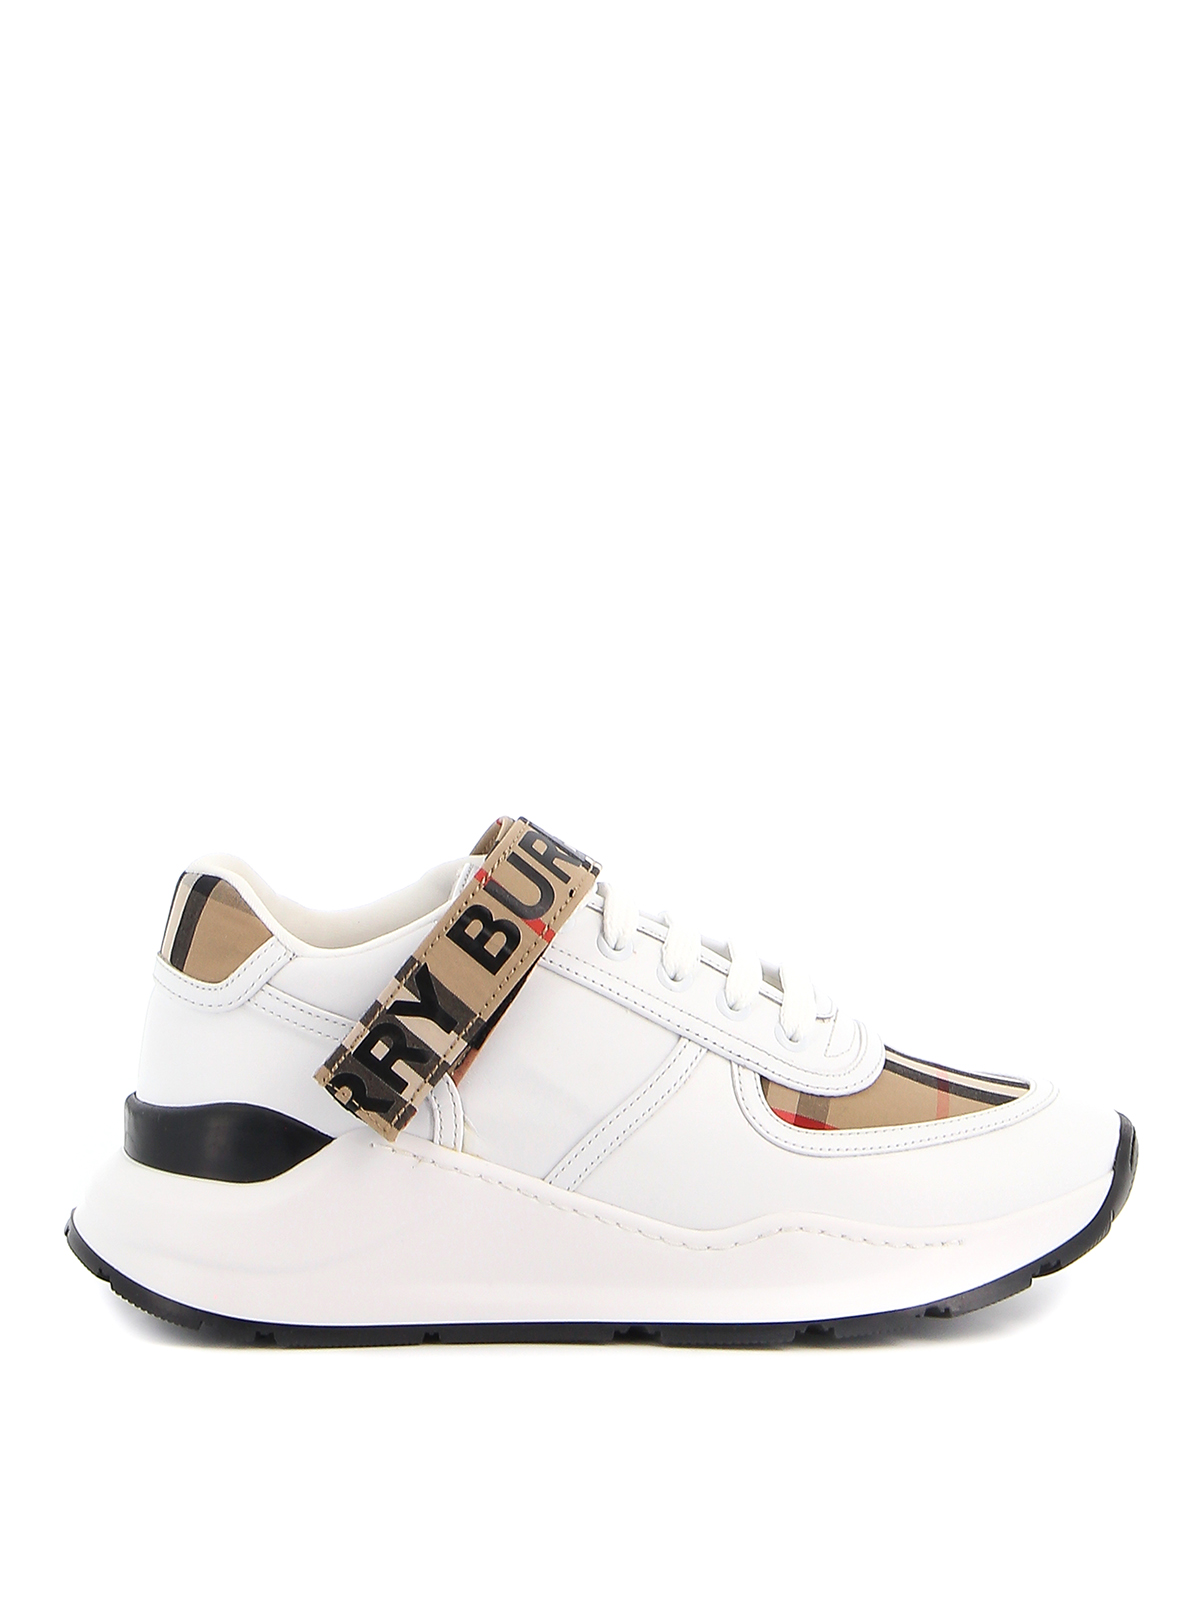 Trainers Burberry - Ronnie Vintage Check sneakers - 8025543 | iKRIX.com